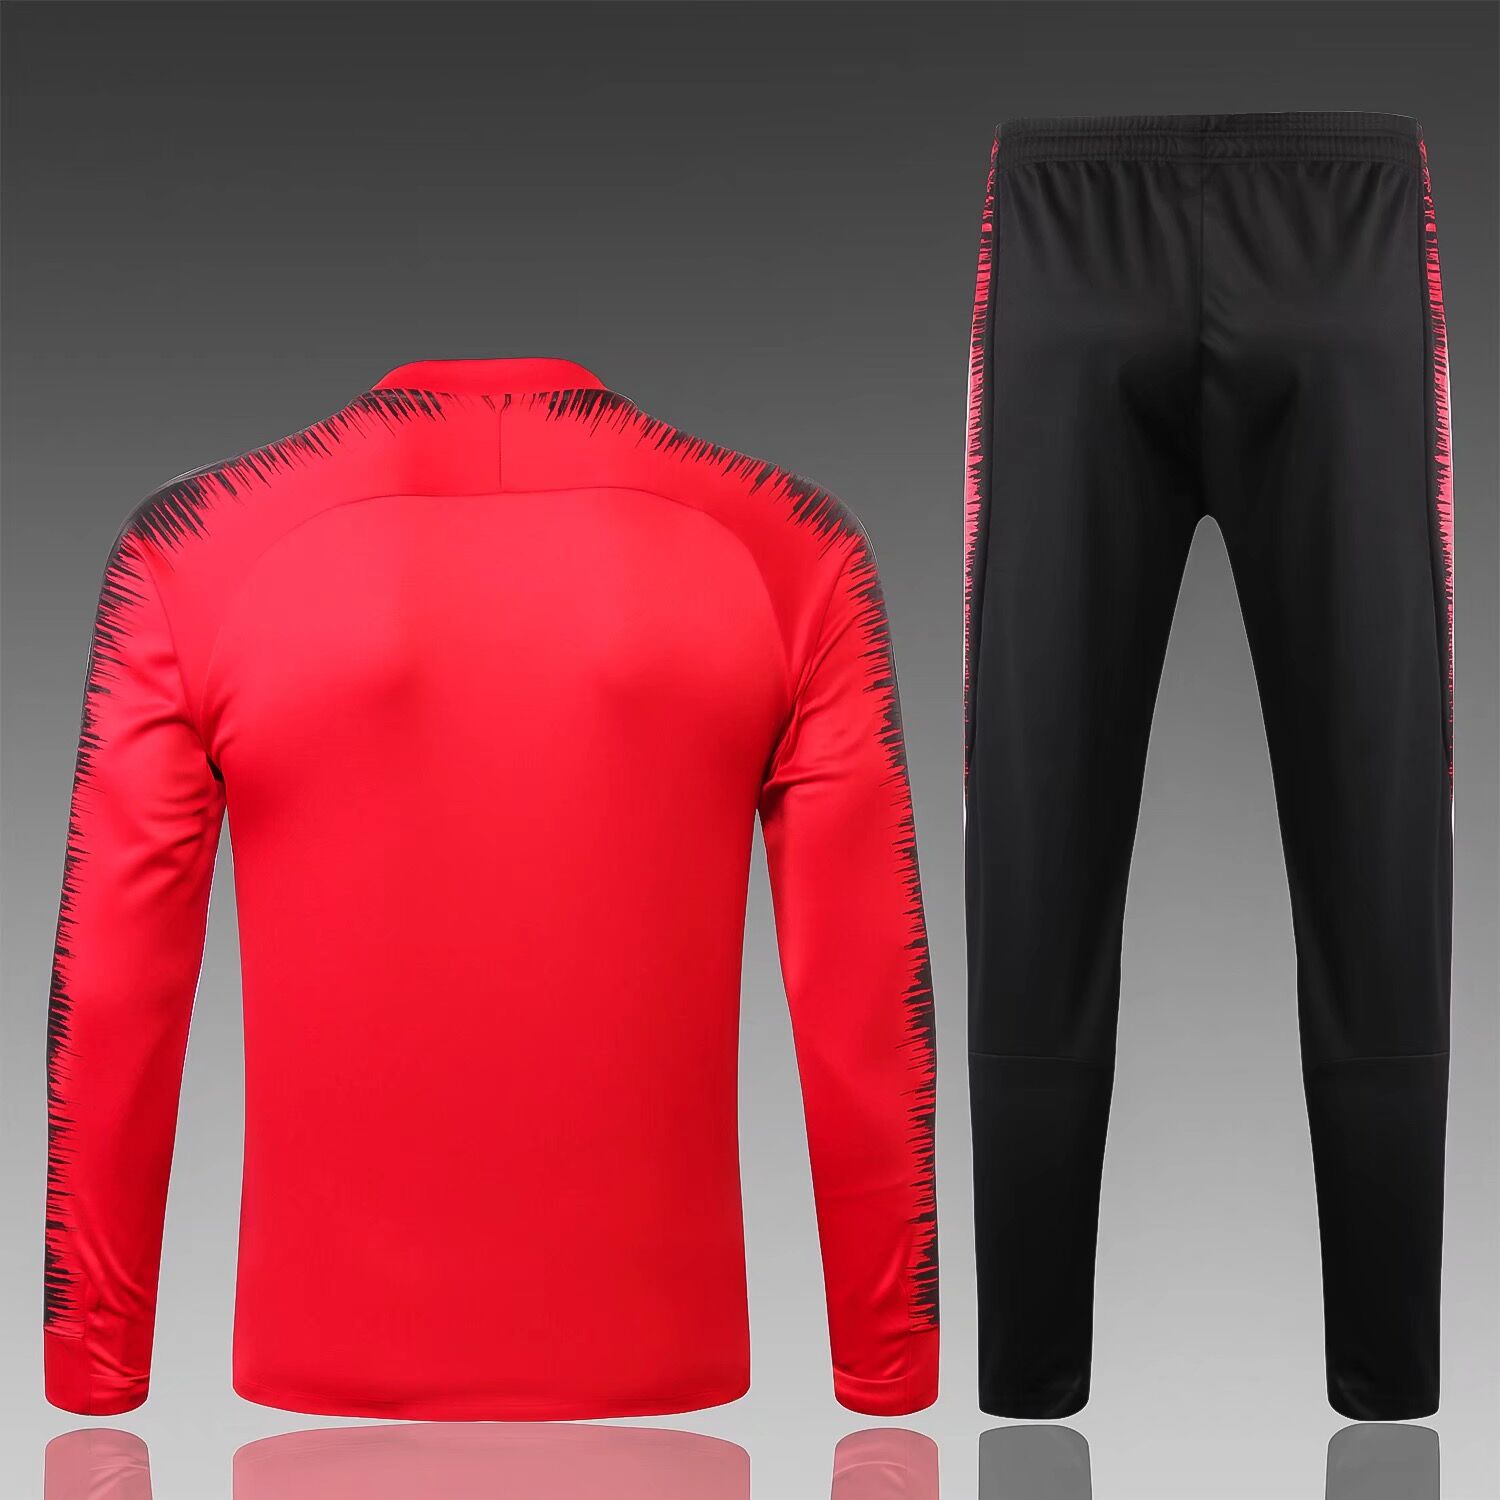 2019-20 PSG Red Tracksuit Kits - Click Image to Close